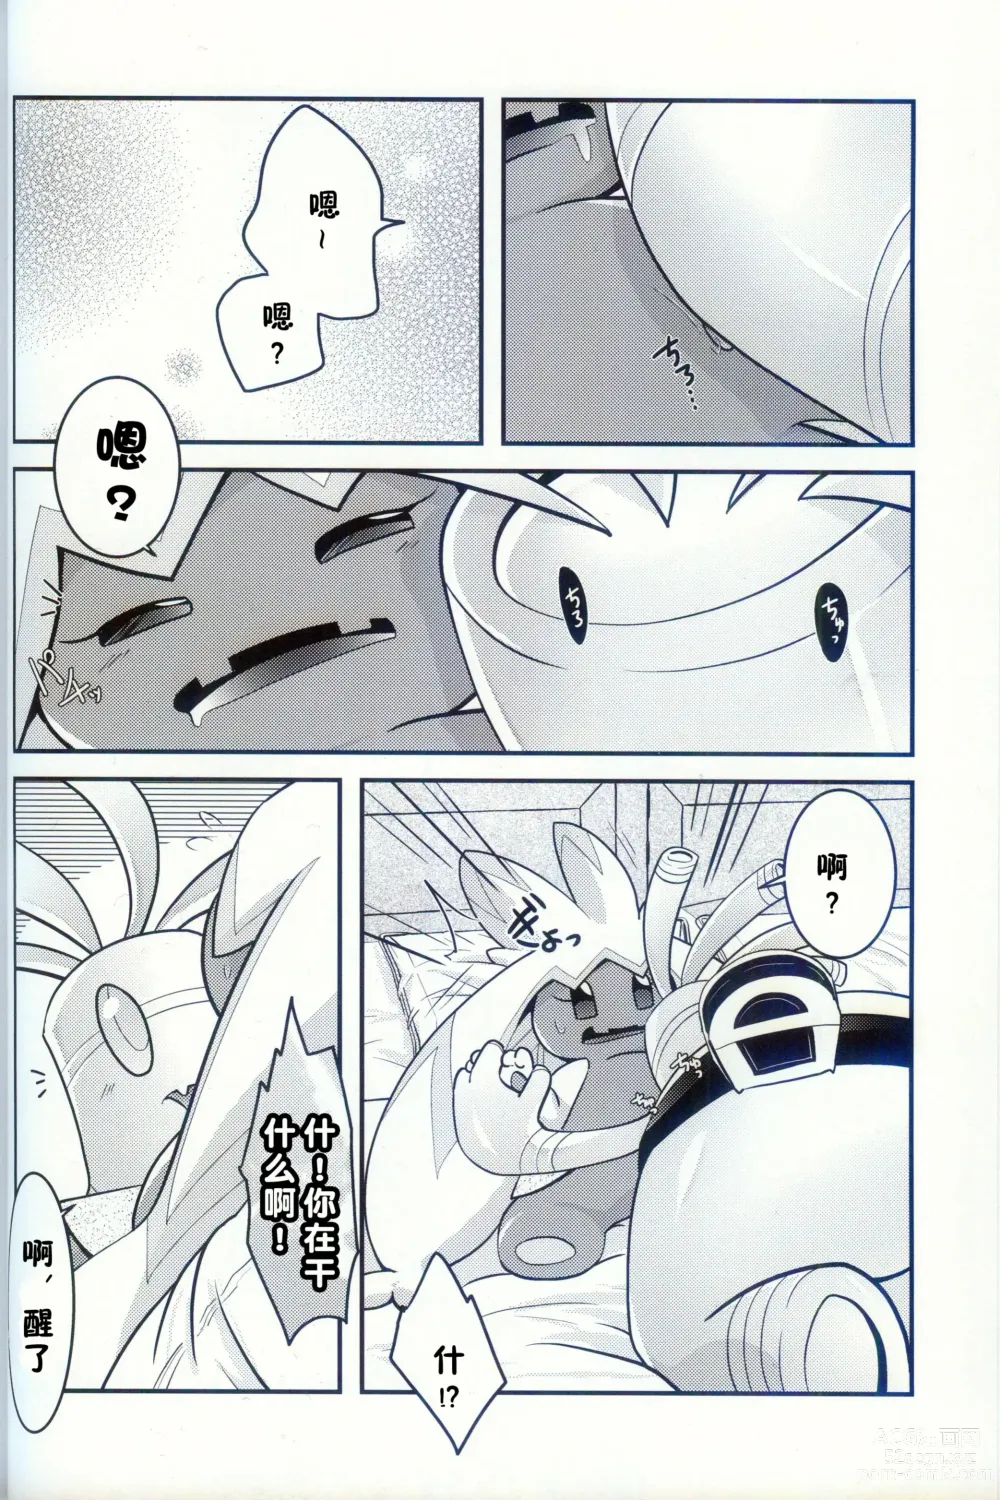 Page 11 of doujinshi 横滨的塞富豪巨锻匠